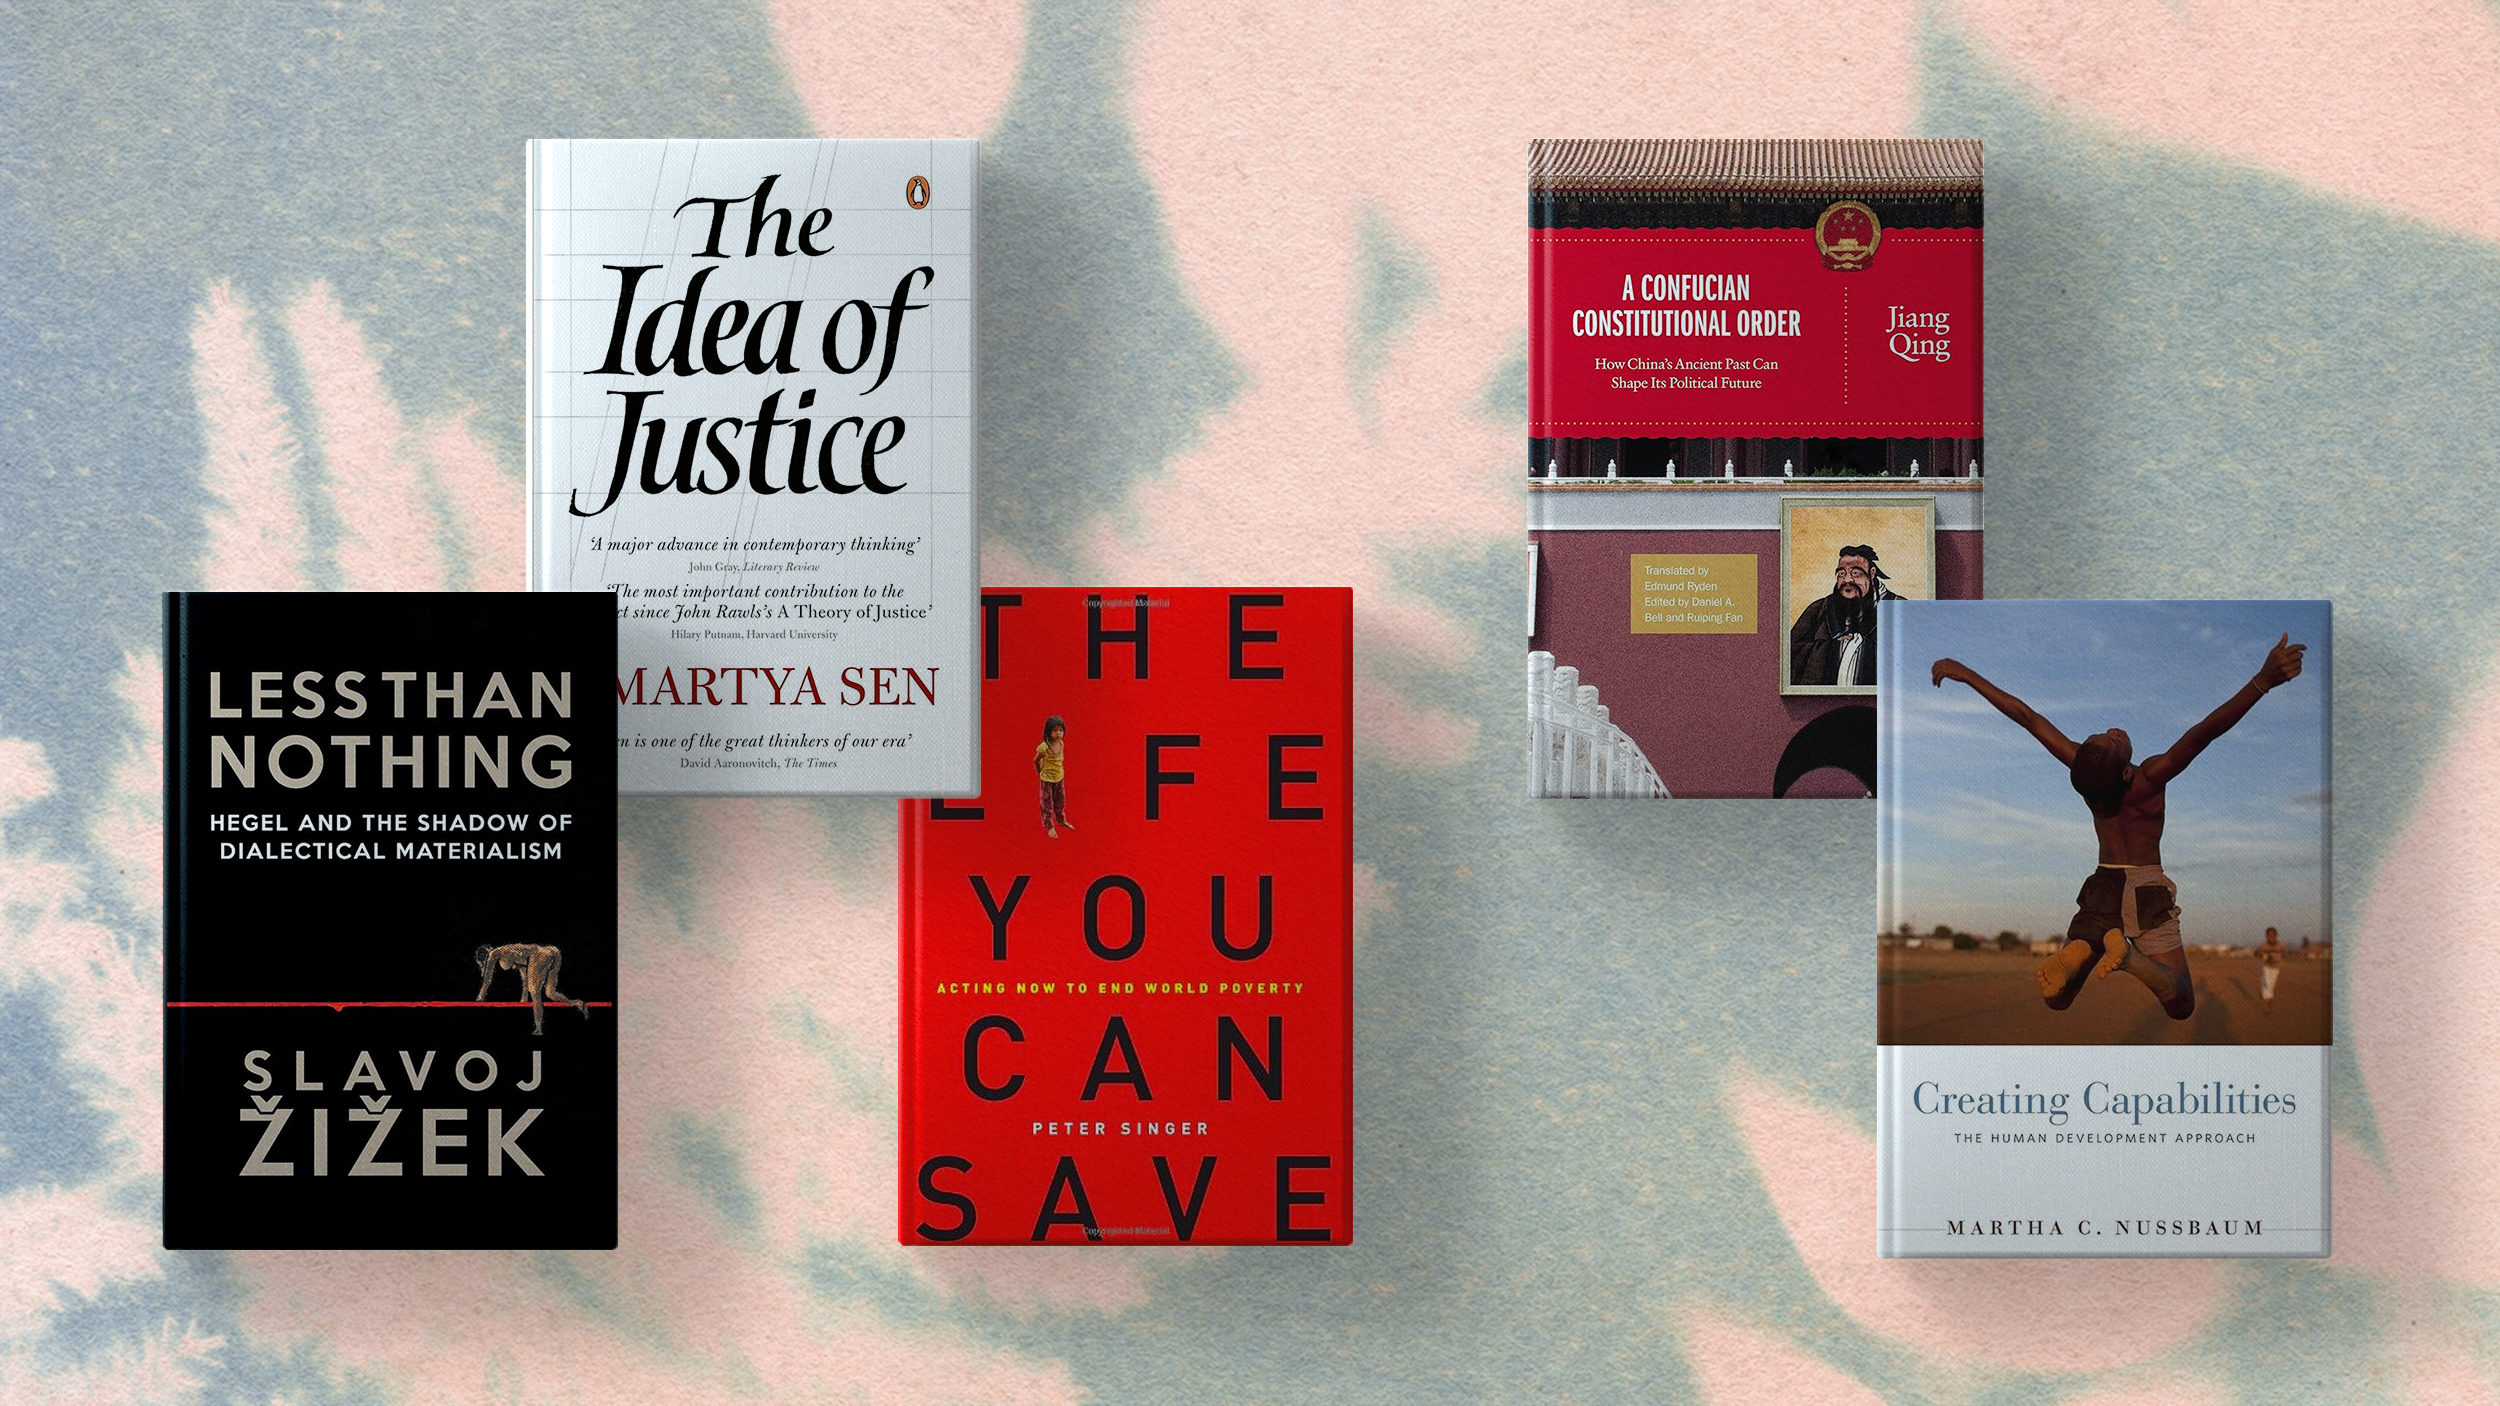 Five modern philosophy books about the idea of justice on a pink background.